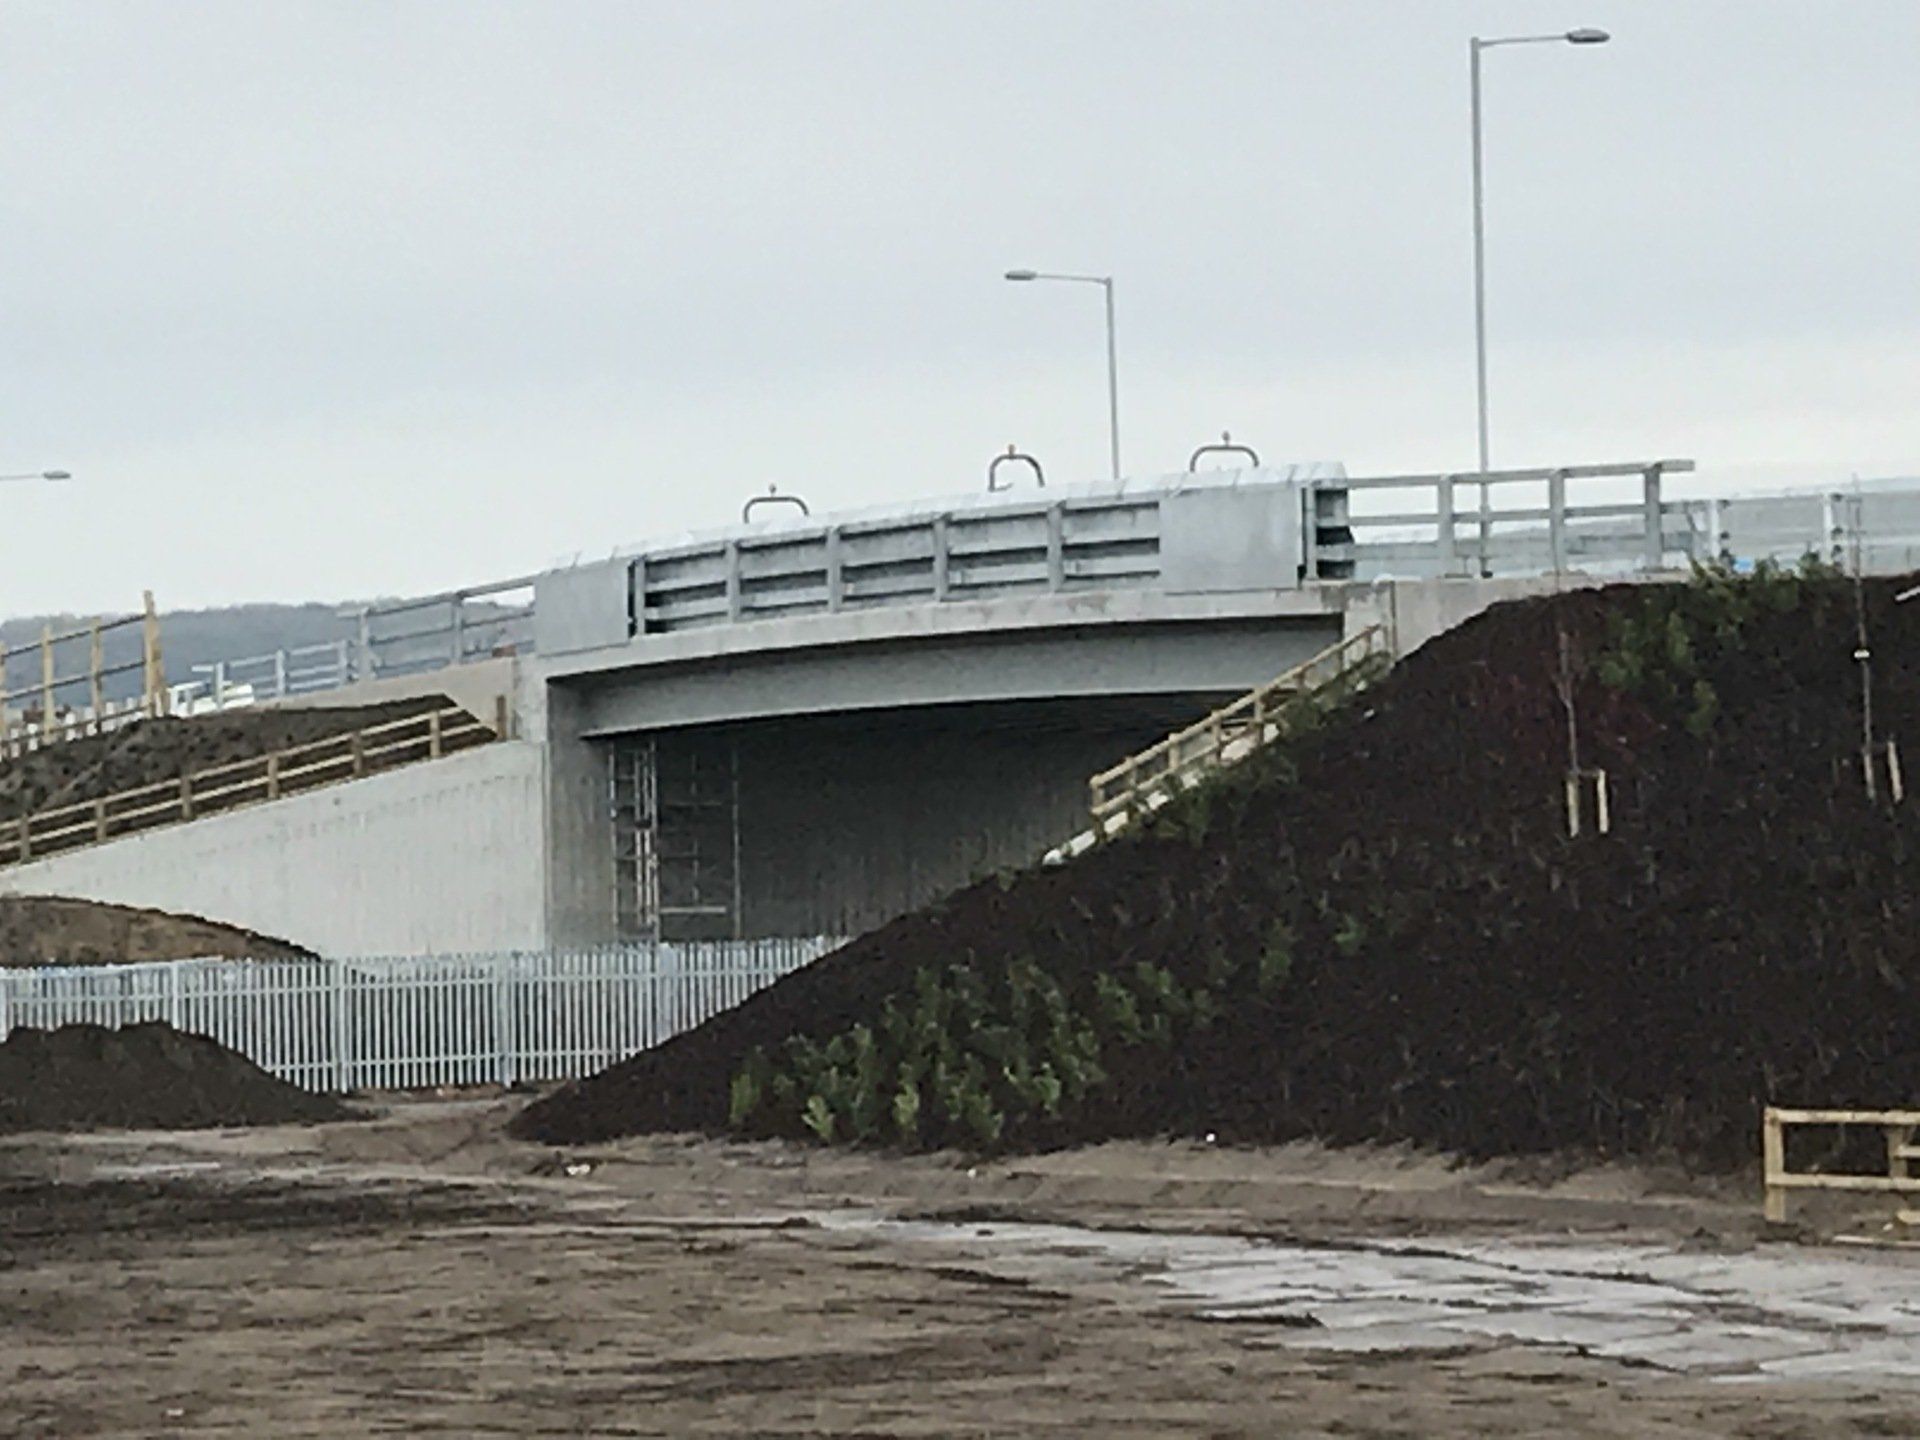 Photos of the Brough relief road built in 2019